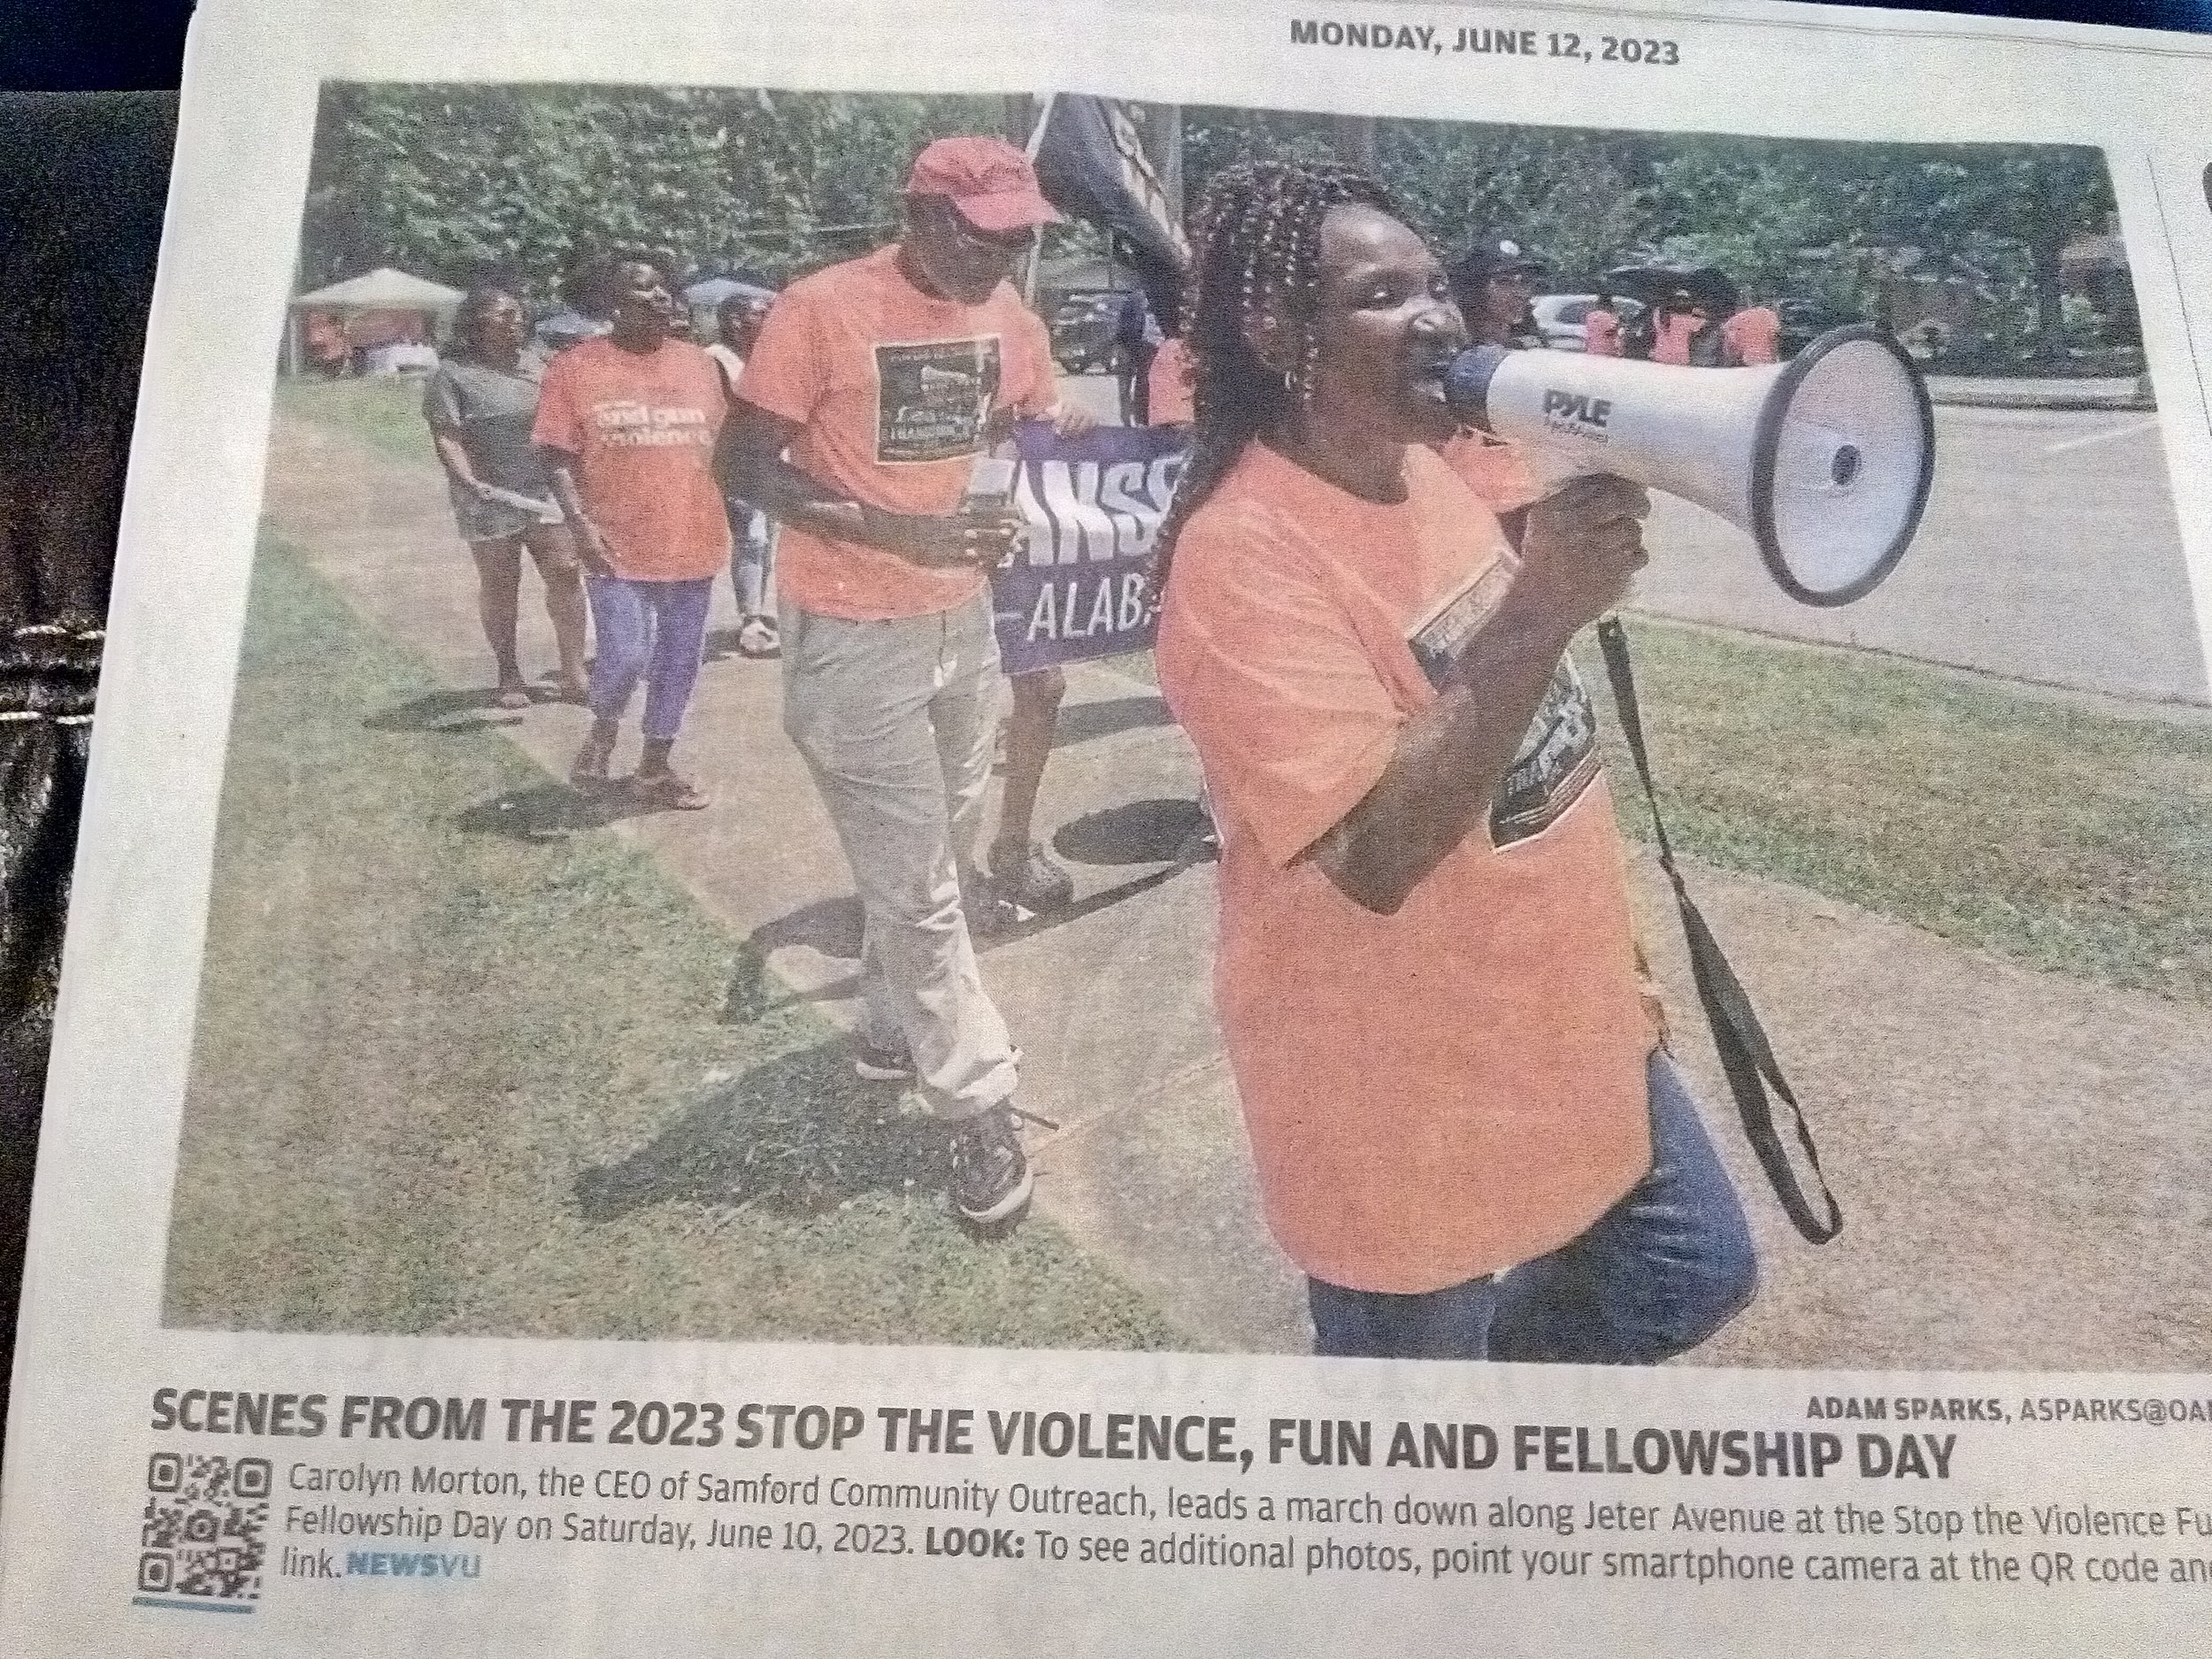 Pastor Carolyn Morton leads a march against violence on Saturday, June 10th in Opelika, AL